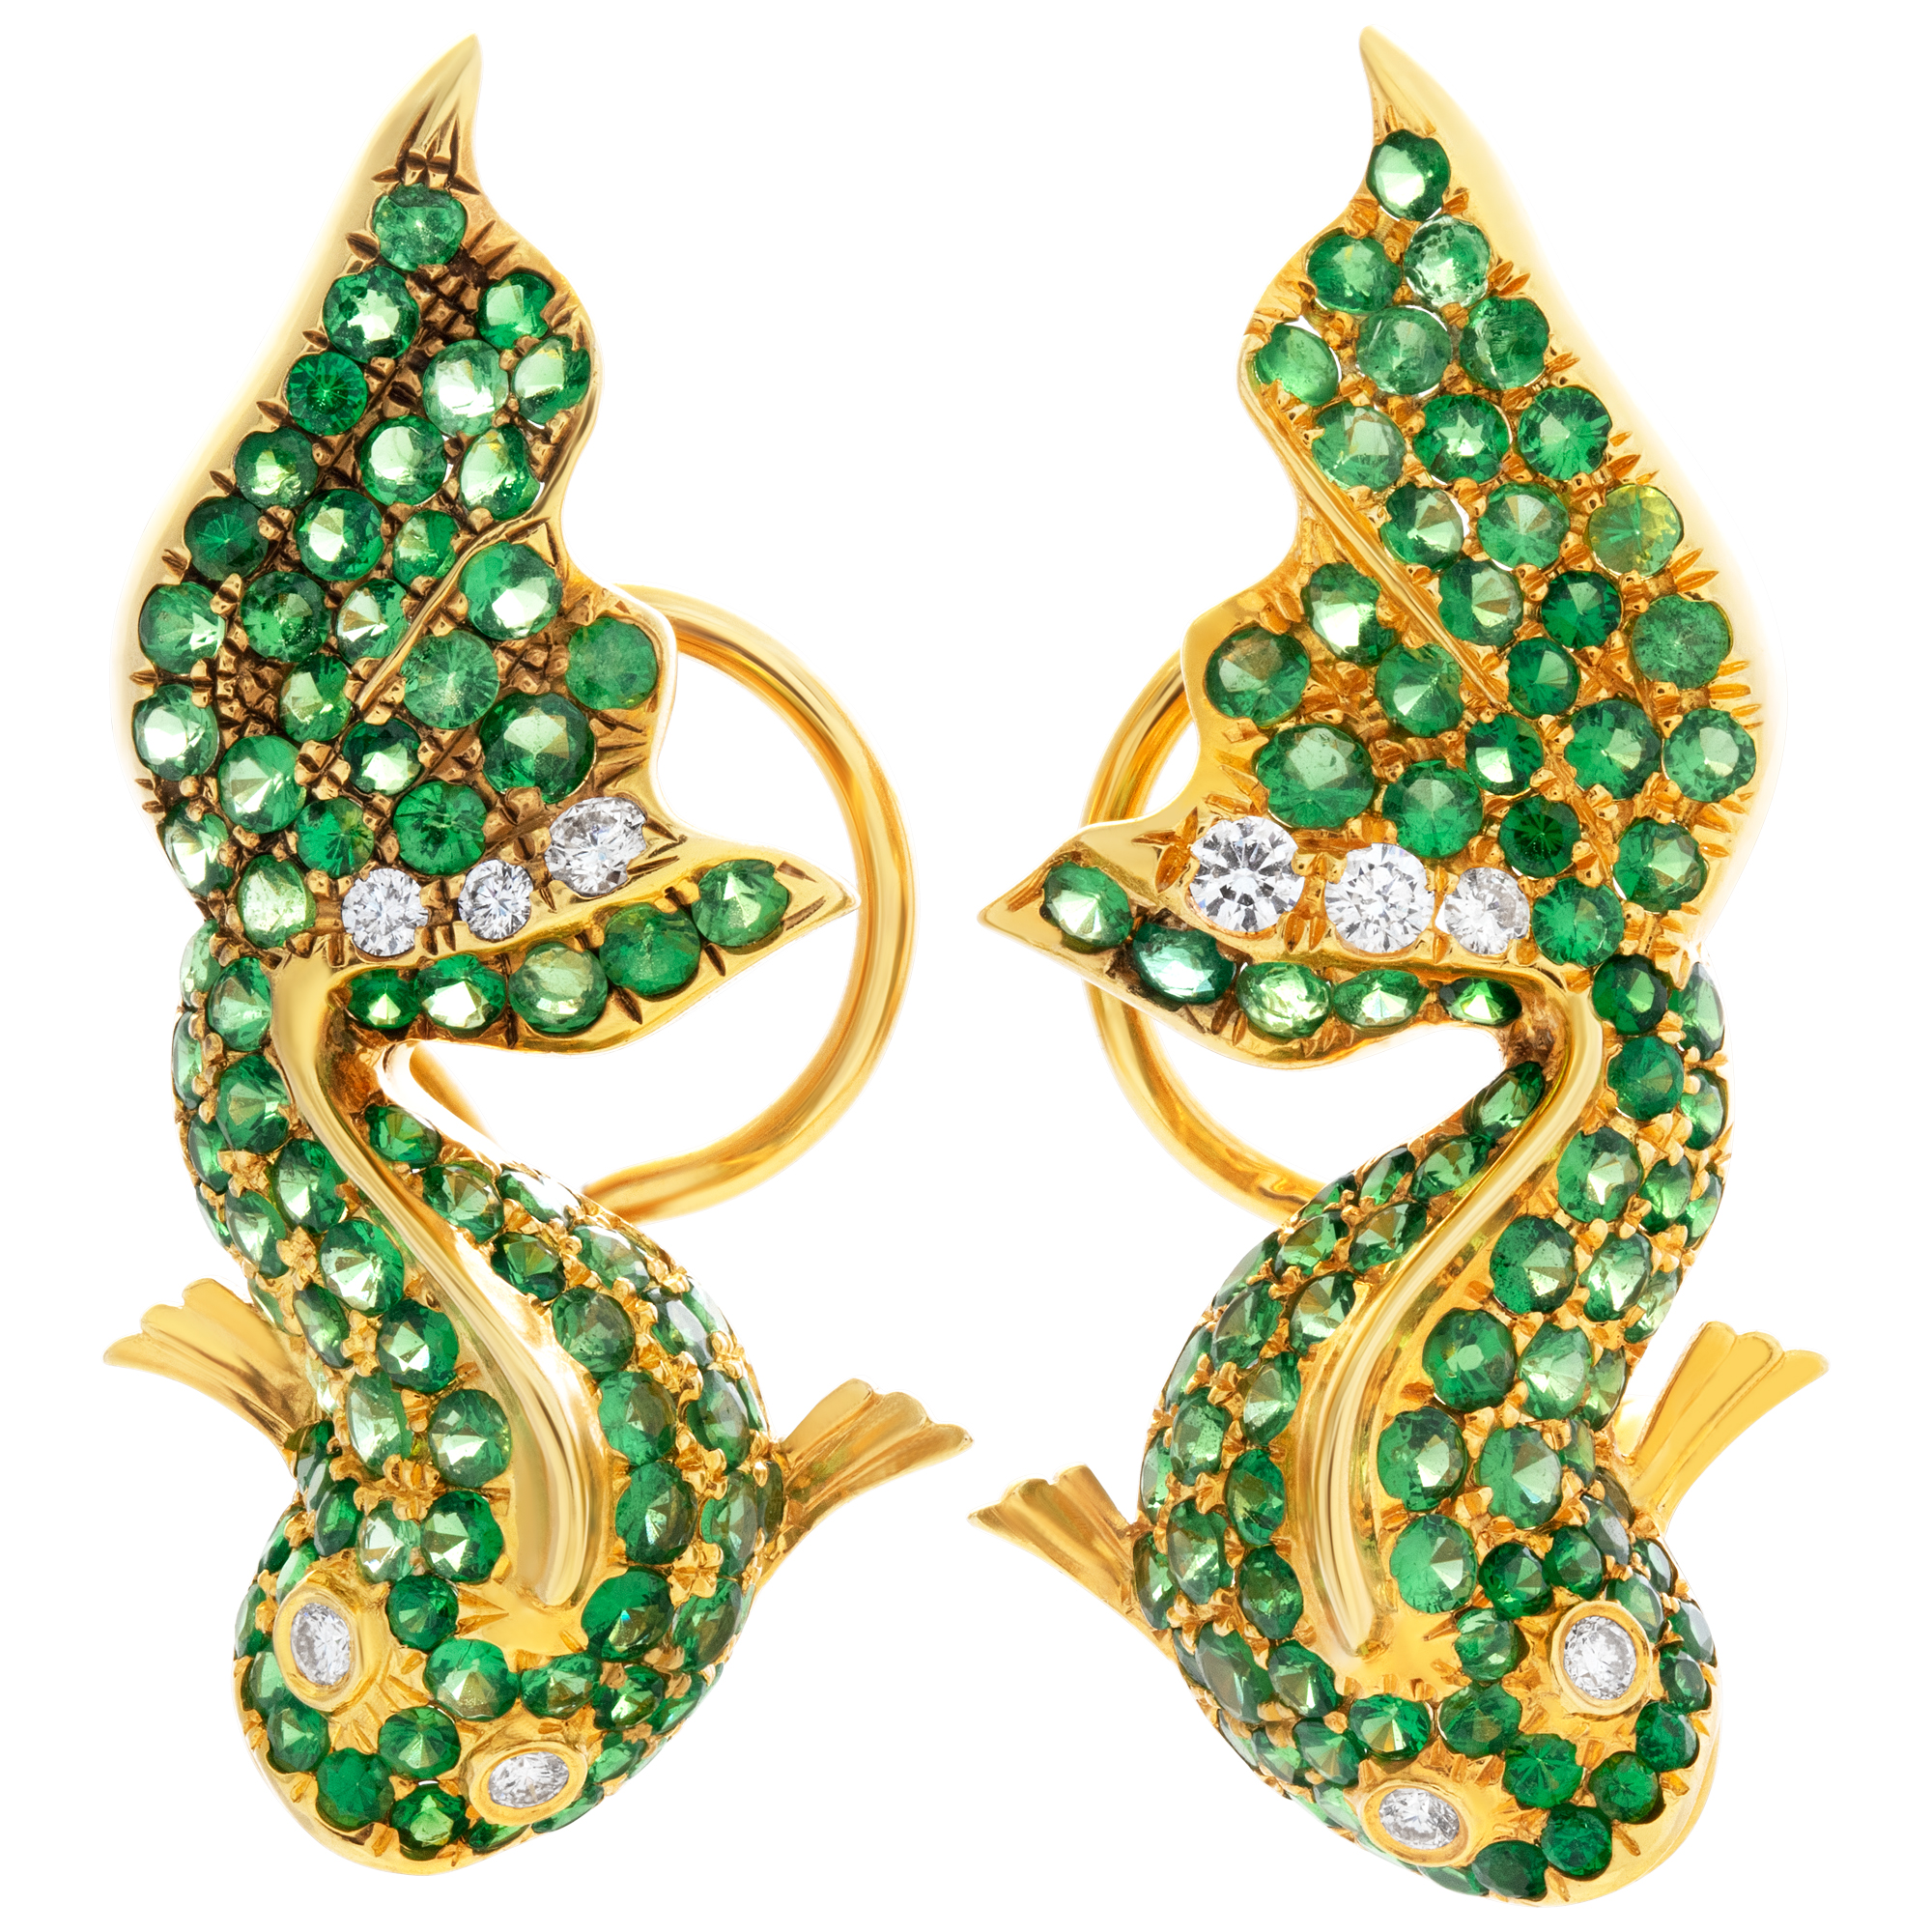 Koy Fish Earrings in 18k yellow gold with pave peridot and diamond accents image 1